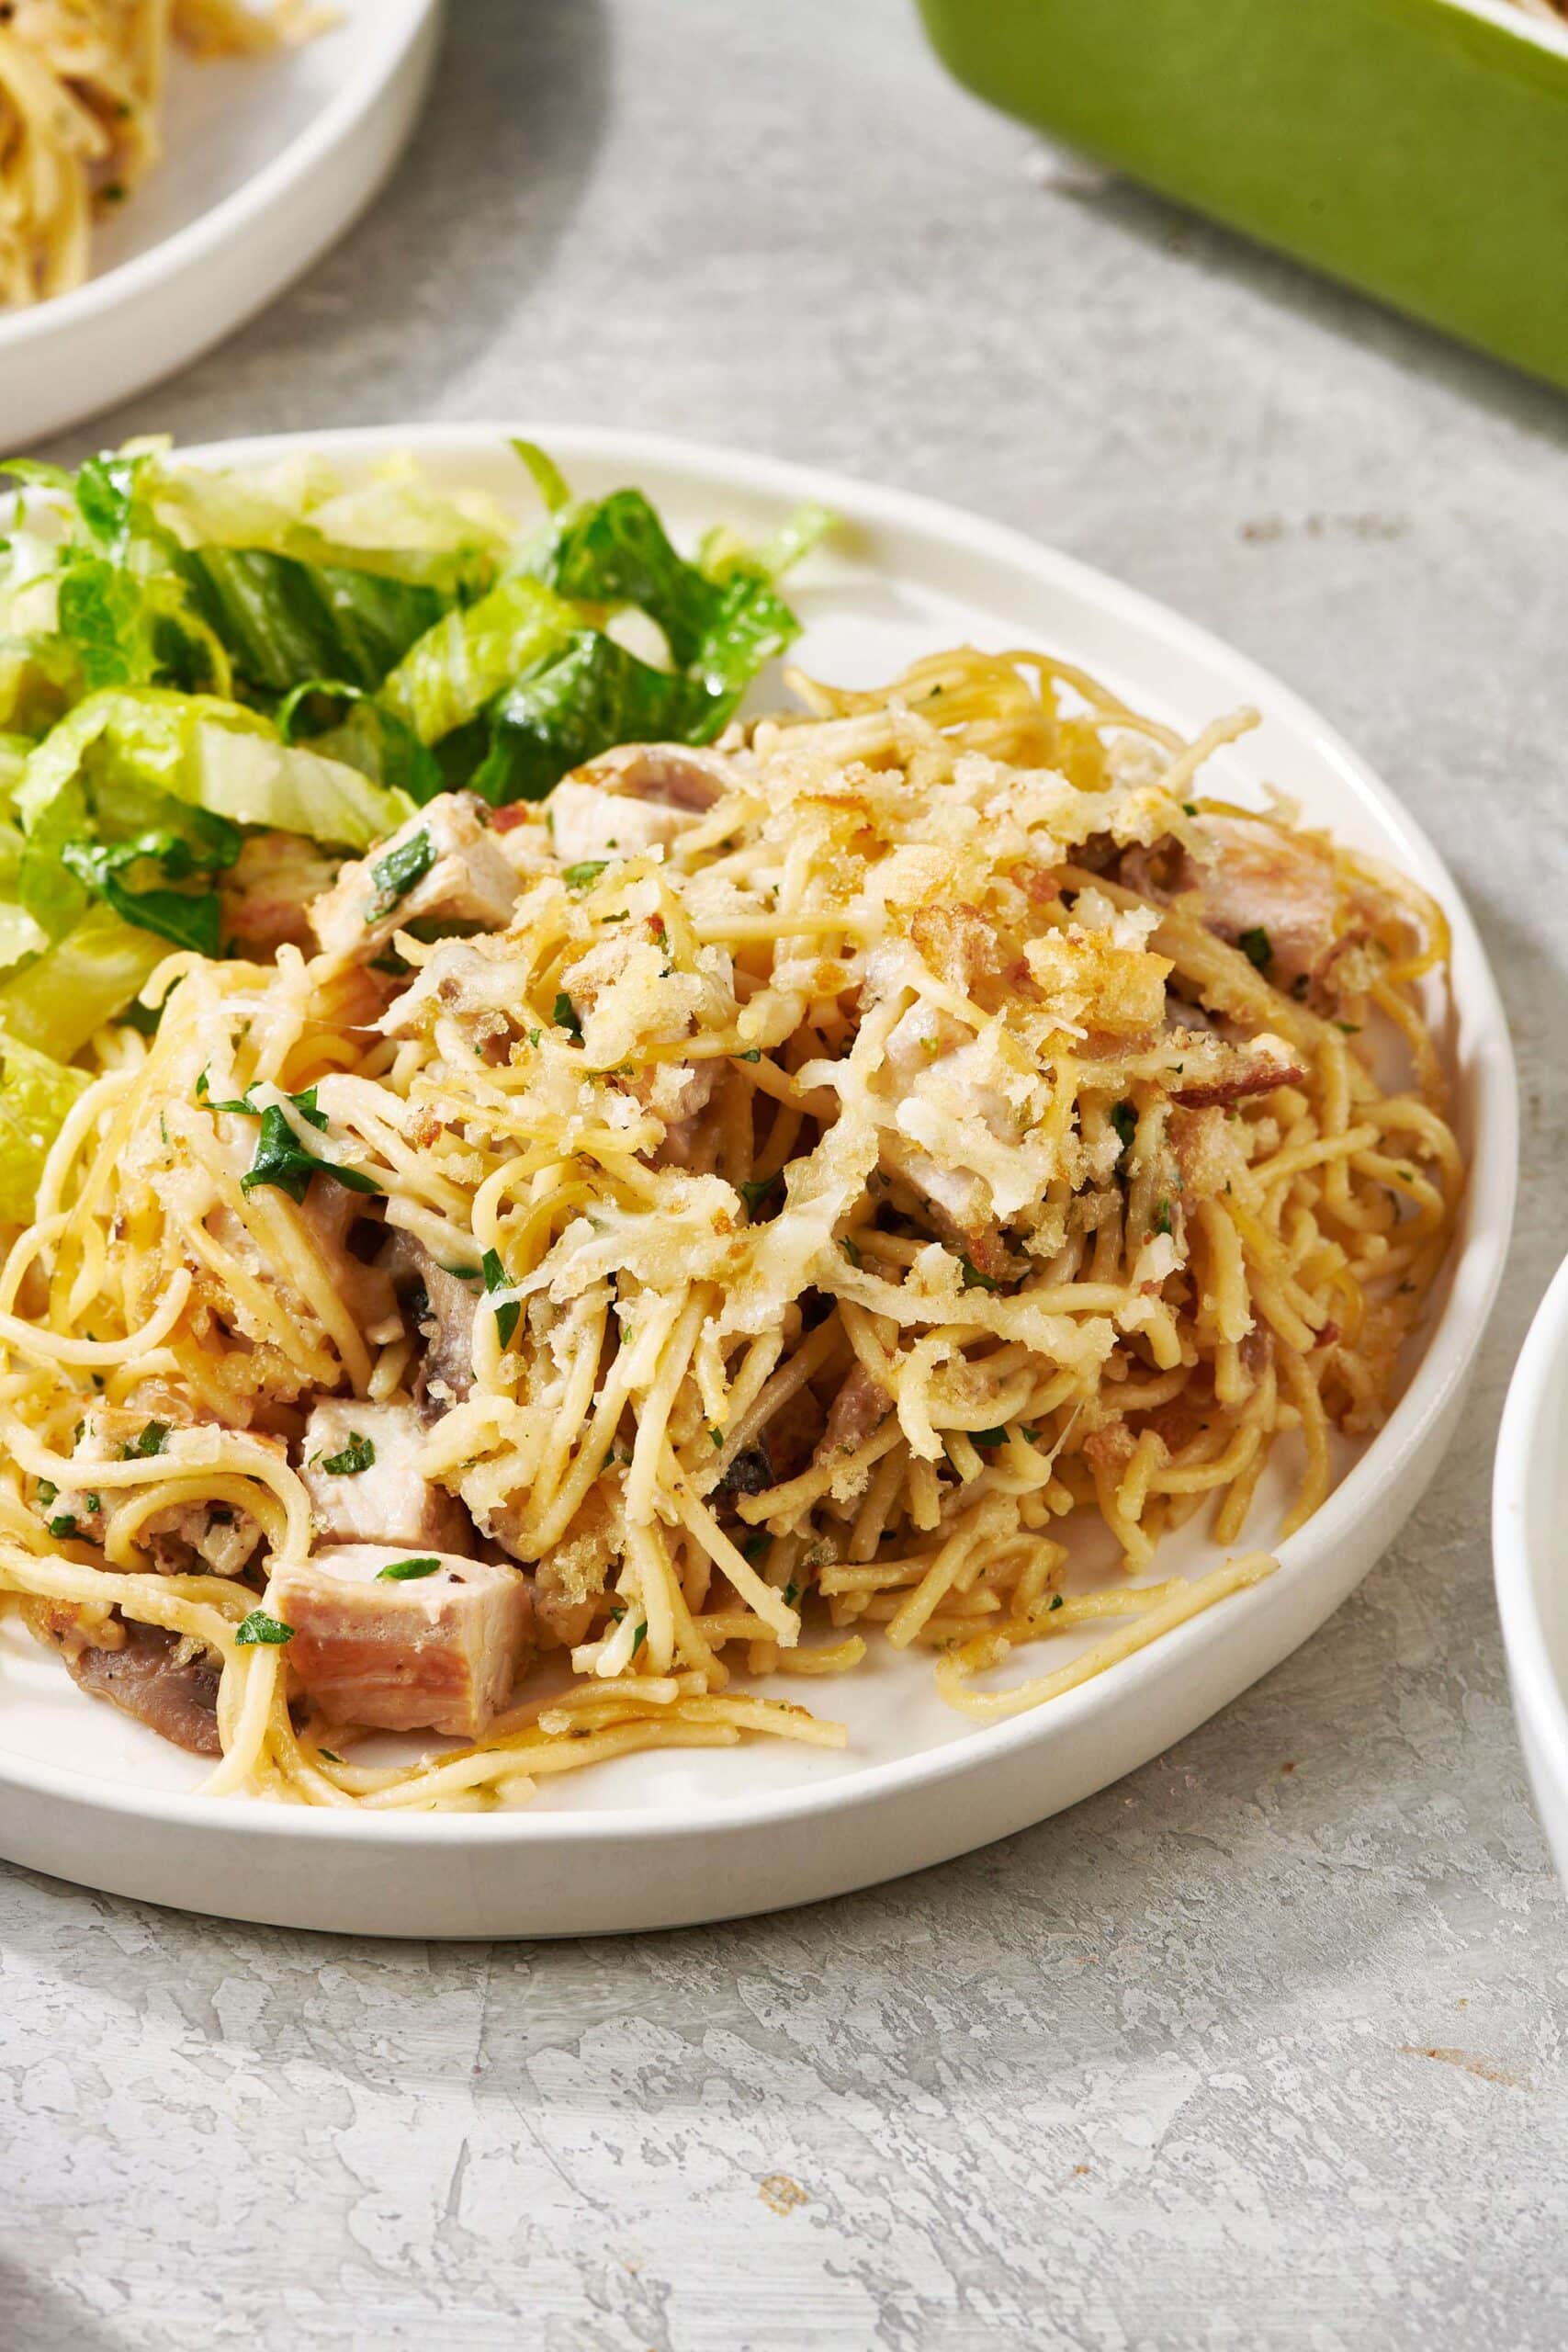 Turkey Tetrazzini topped with Parmesan cheese on a plate with salad.